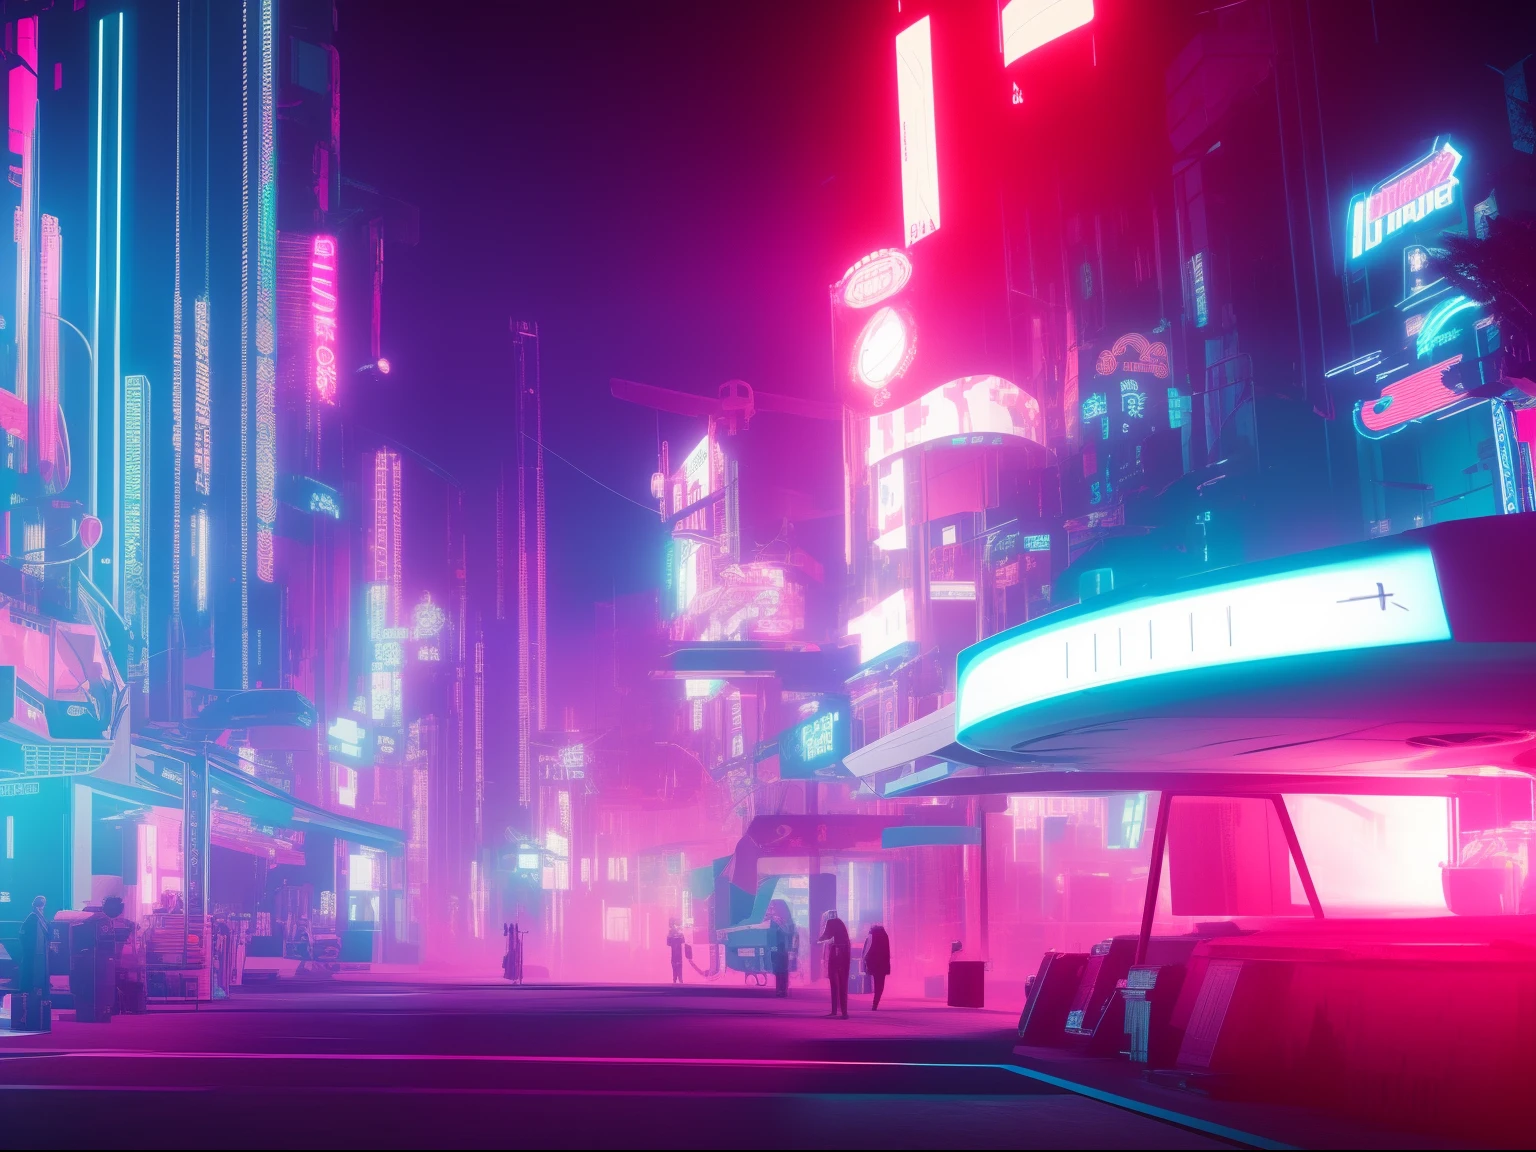 Create a cover for an electronic music album with the art in the neon cyberpunk model